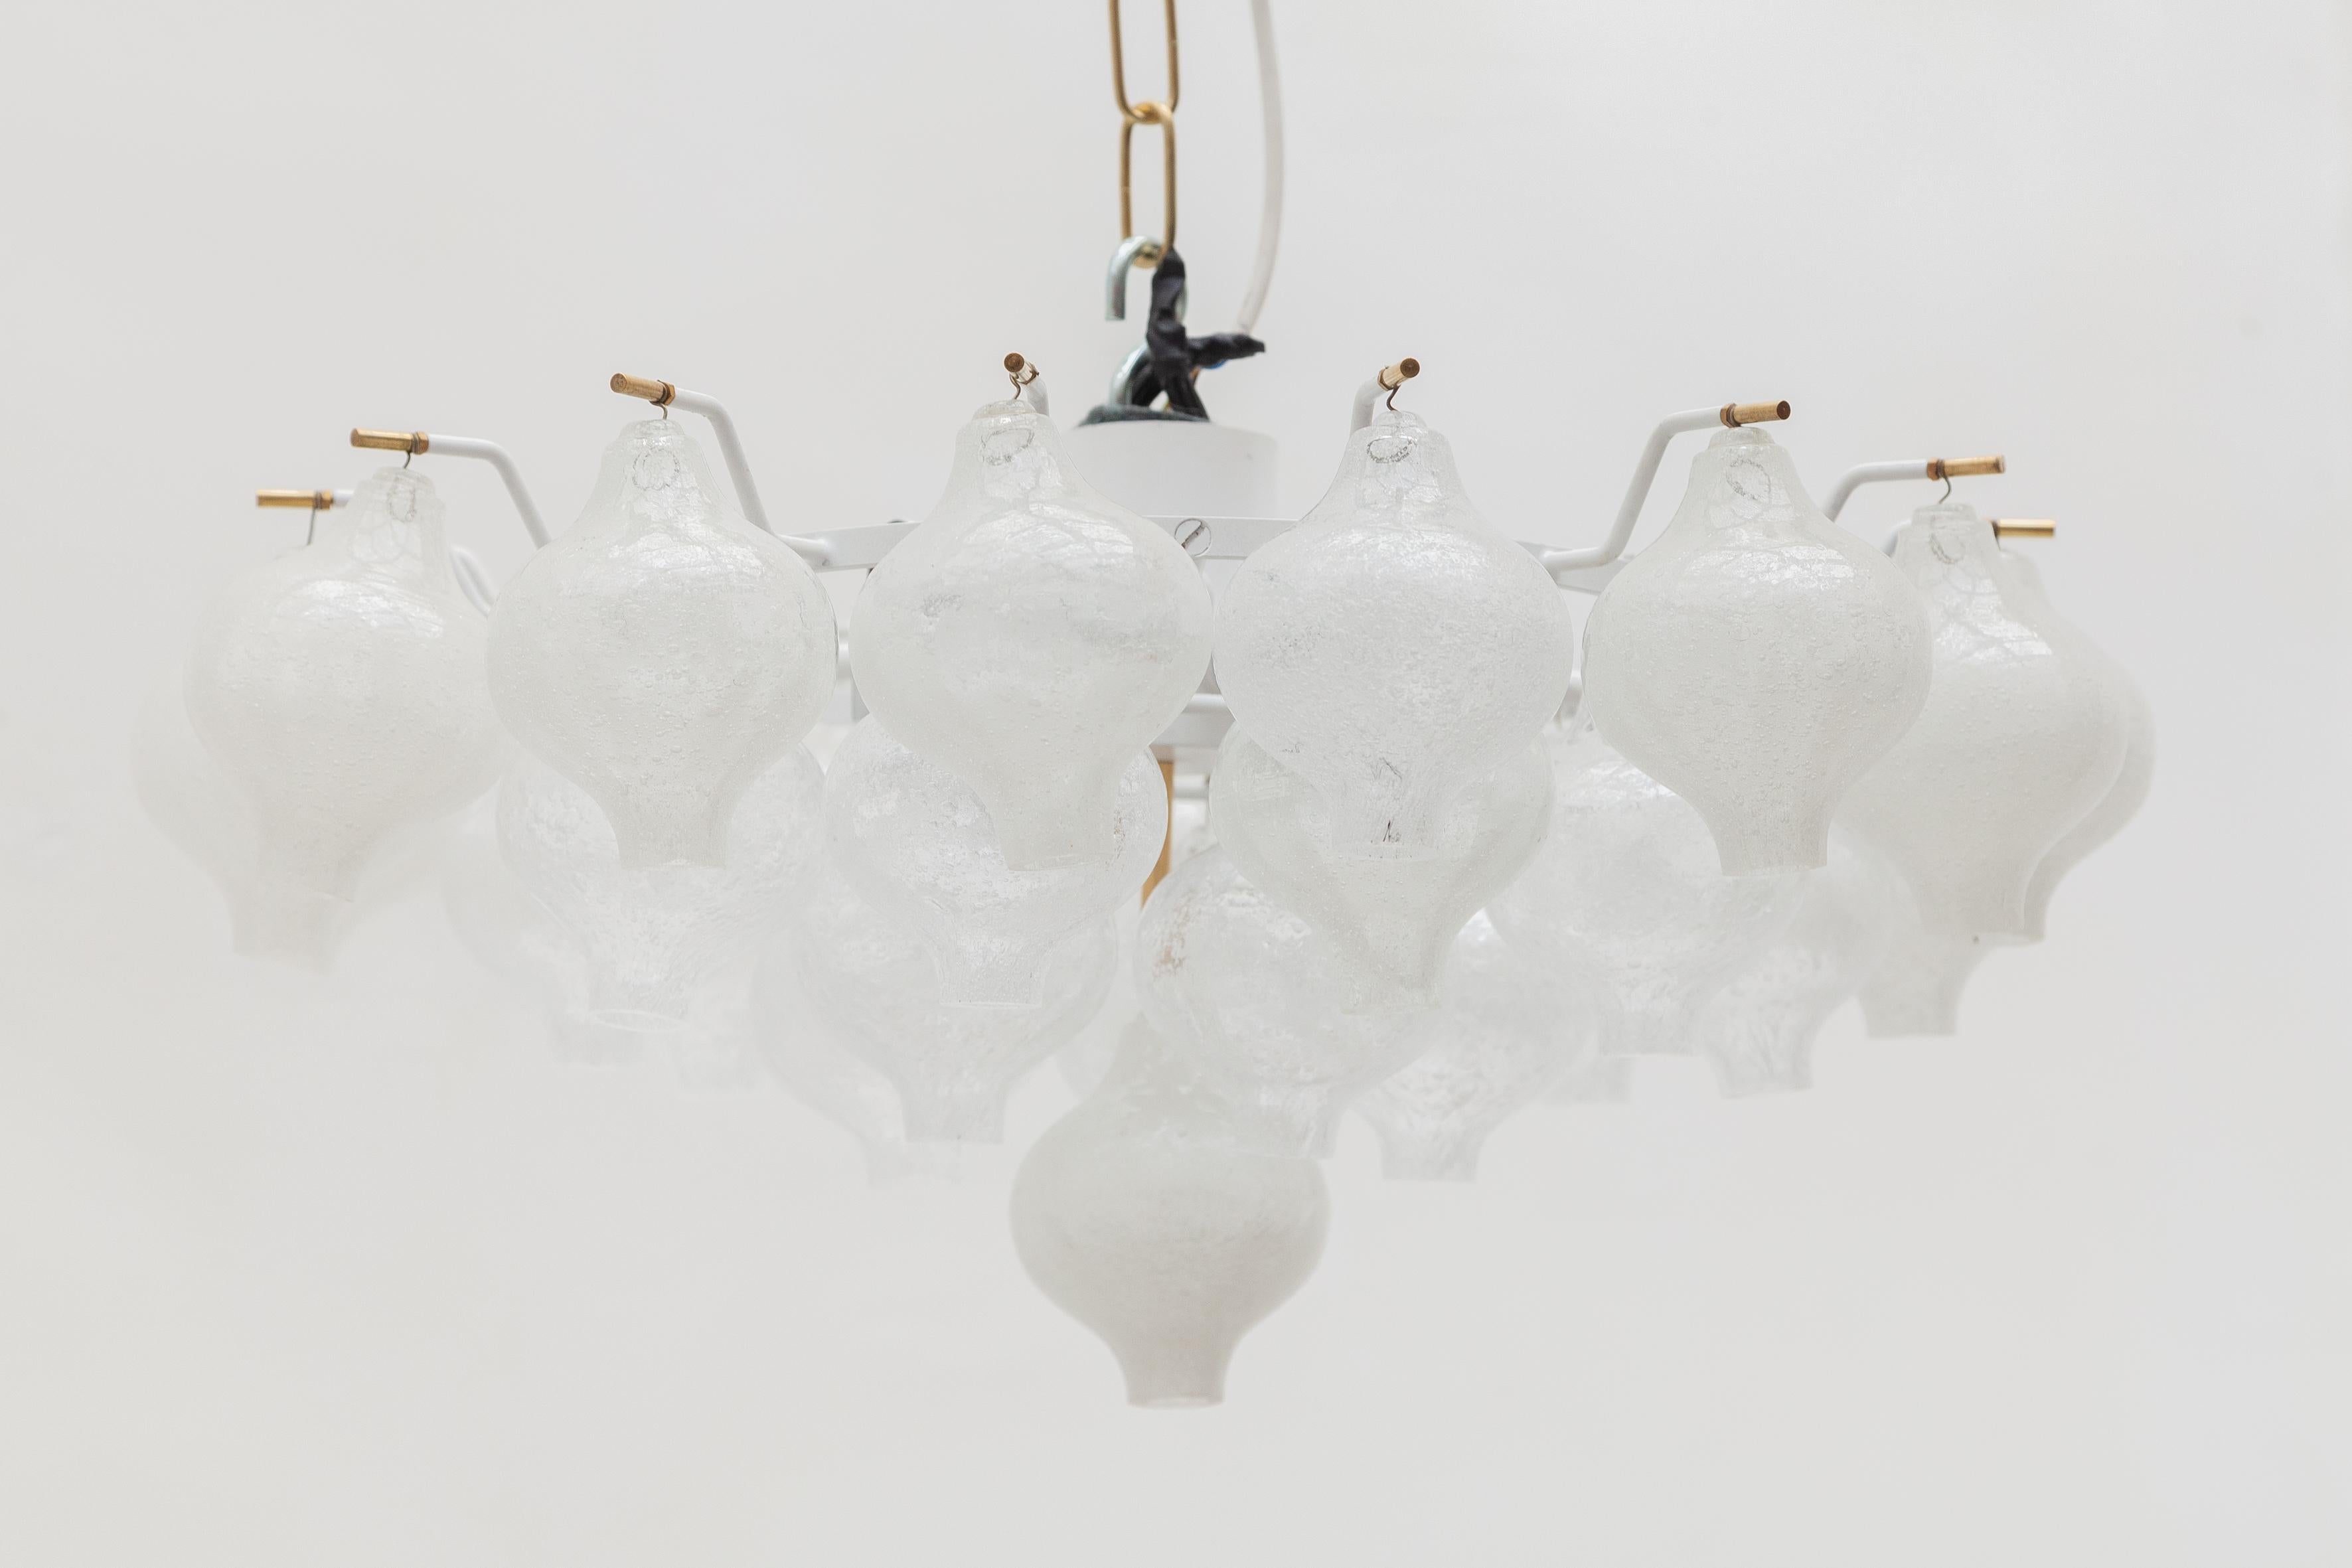 Large flush-mount with Tulipan designed glass models was manufactured by J.T. Kalmar. It features a metal white lacquered frame with brass details, ten bulbs and Murano hand-blown glass Tulipans. The chandelier is in excellent vintage condition with